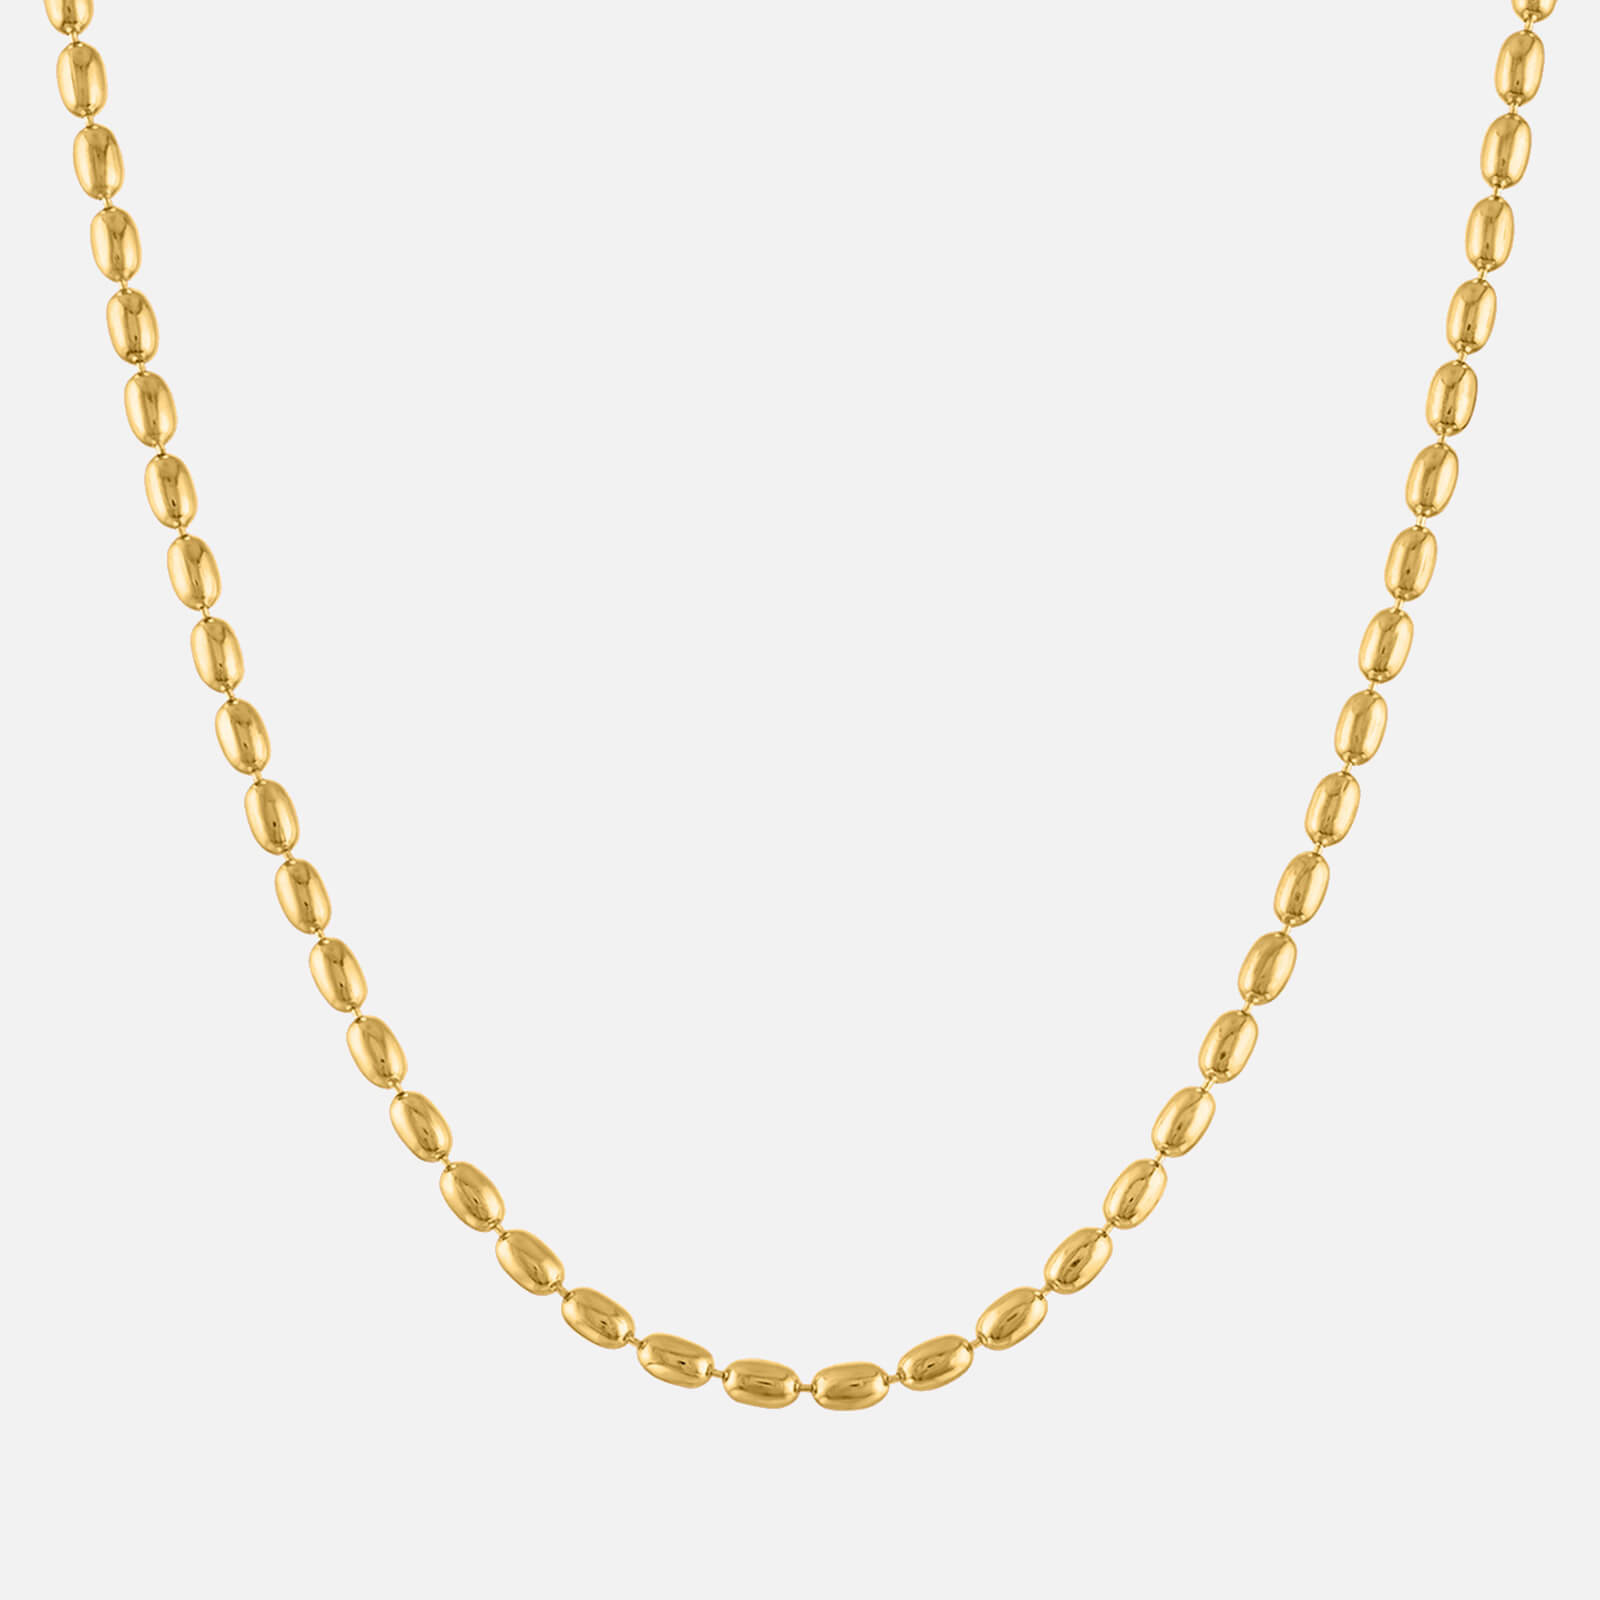 Oma The Label The Ekan 18 Karat Gold-Plated Chain Necklace